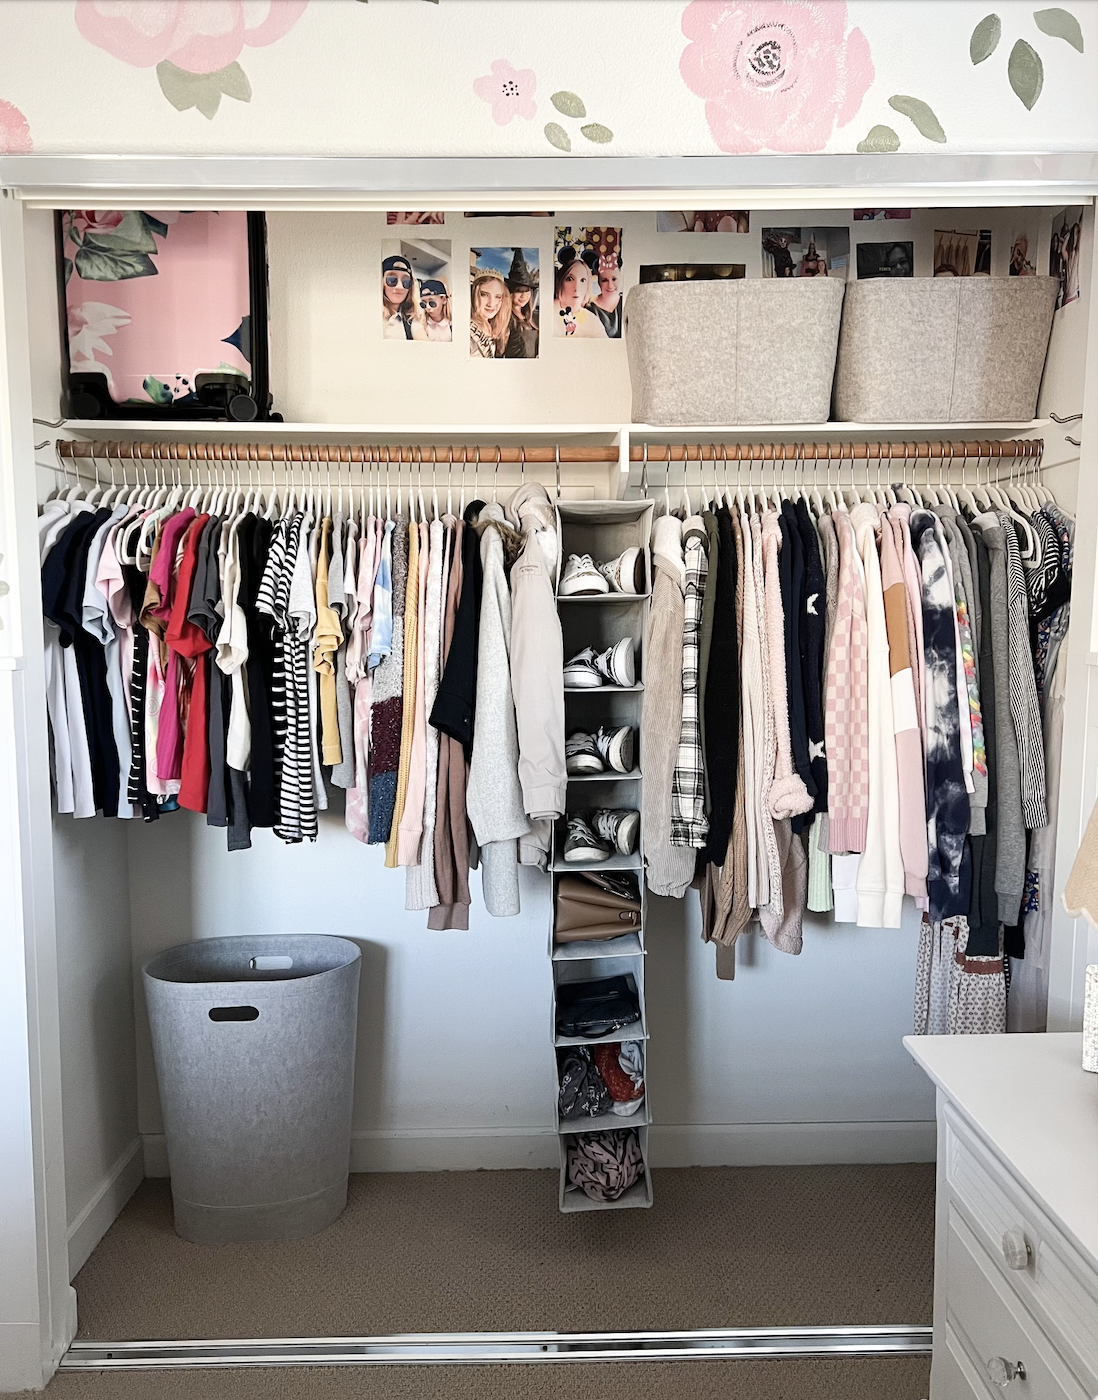 Genius Closet Organizing Ideas From Target's New Made by Design Line